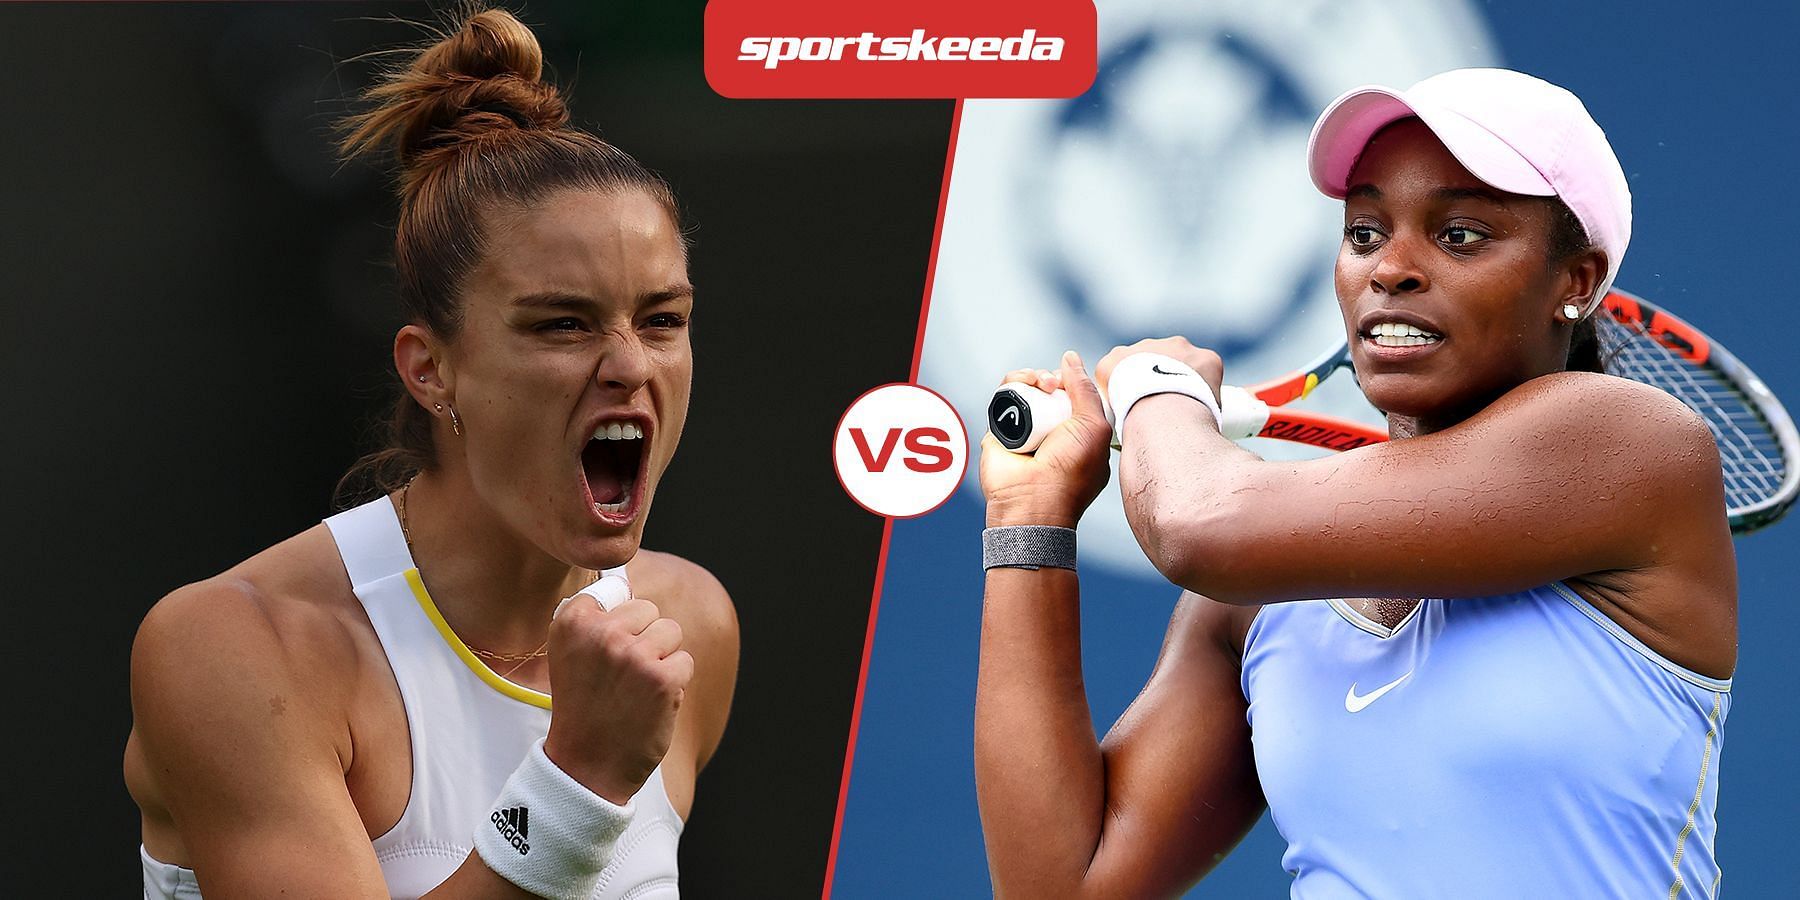 Maria Sakkari will face off against Sloane Stephens in the second round of the Canadian Open